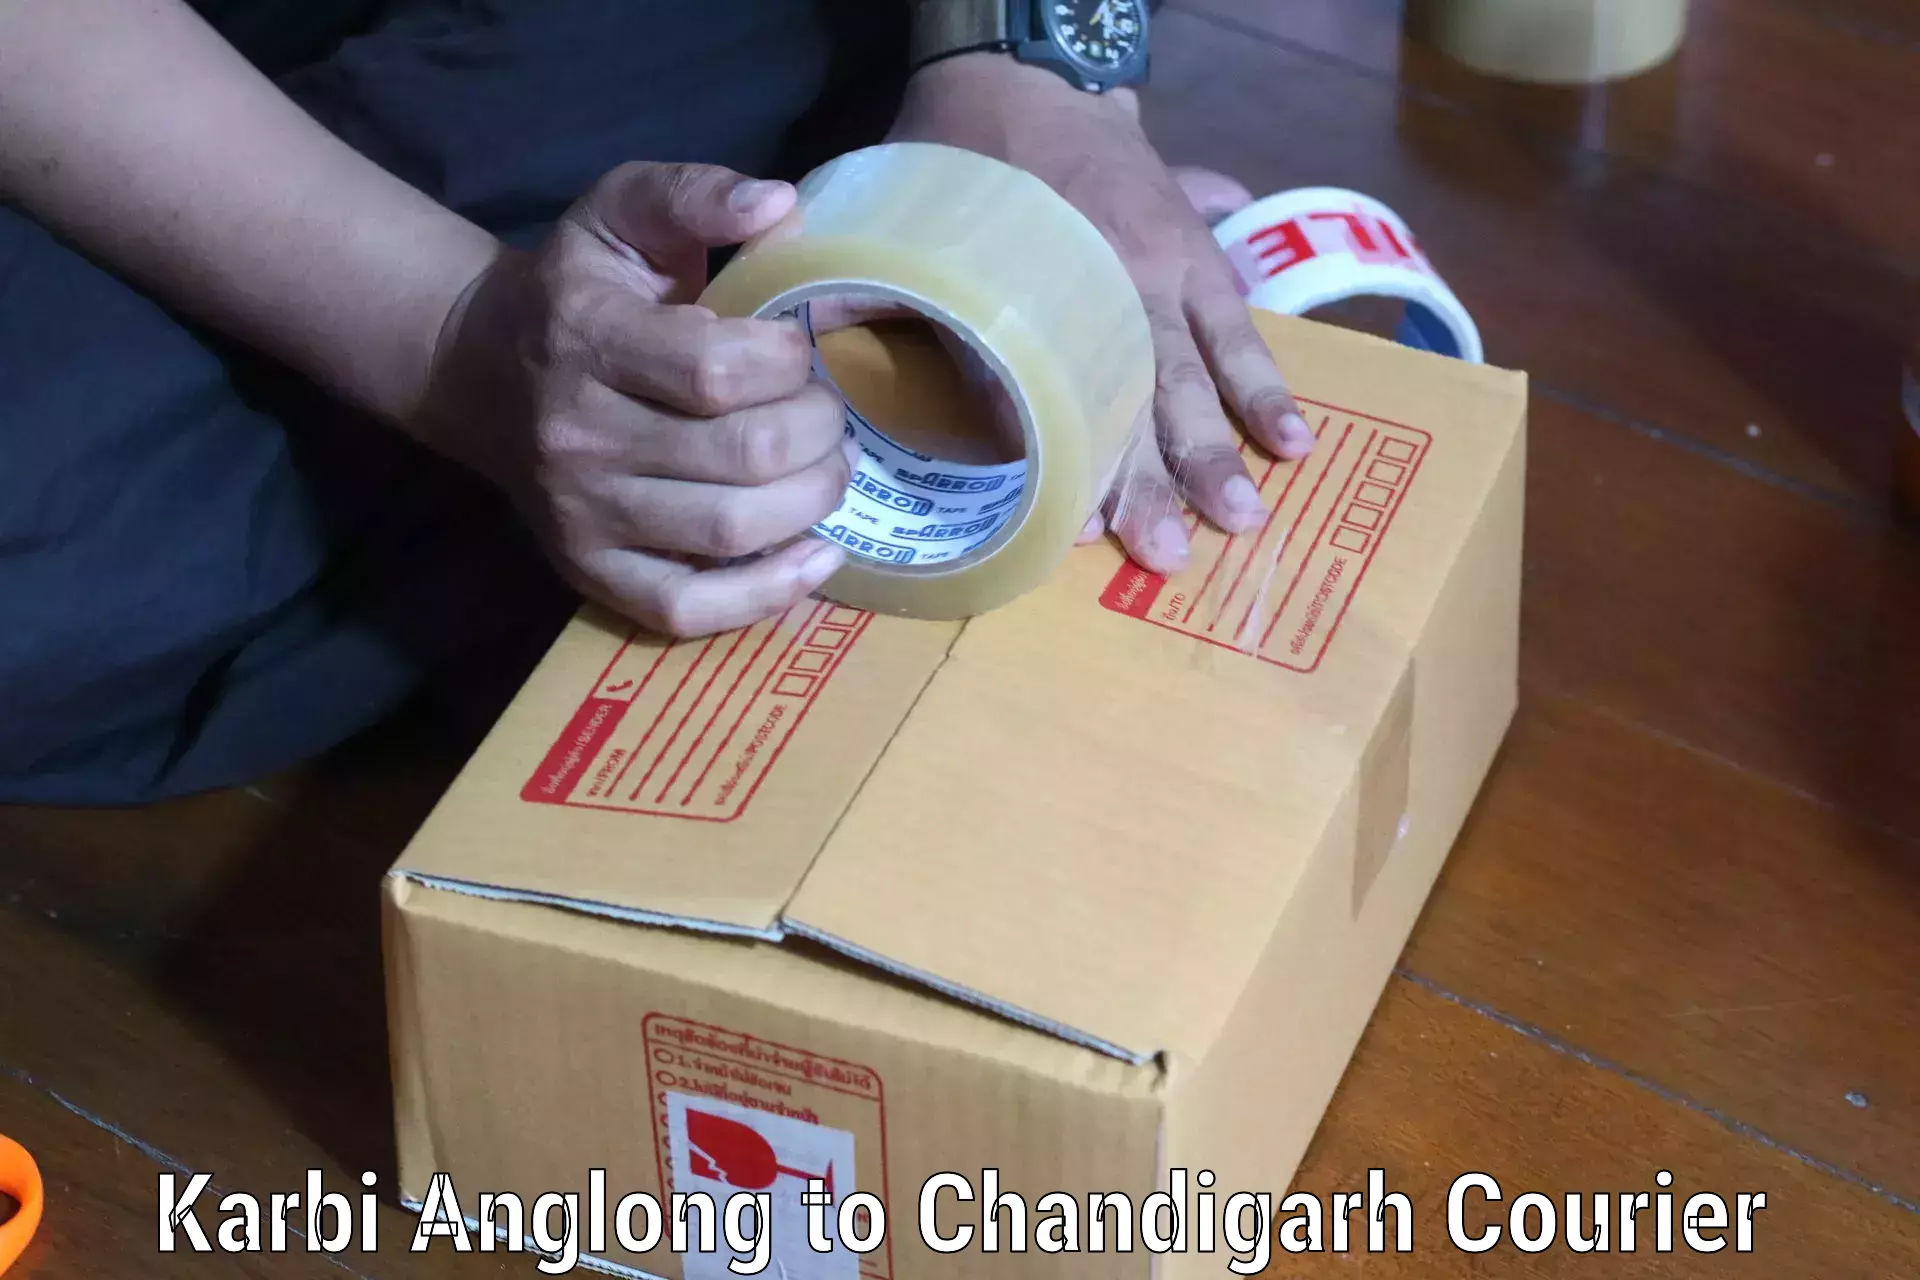 Multi-city courier Karbi Anglong to Chandigarh